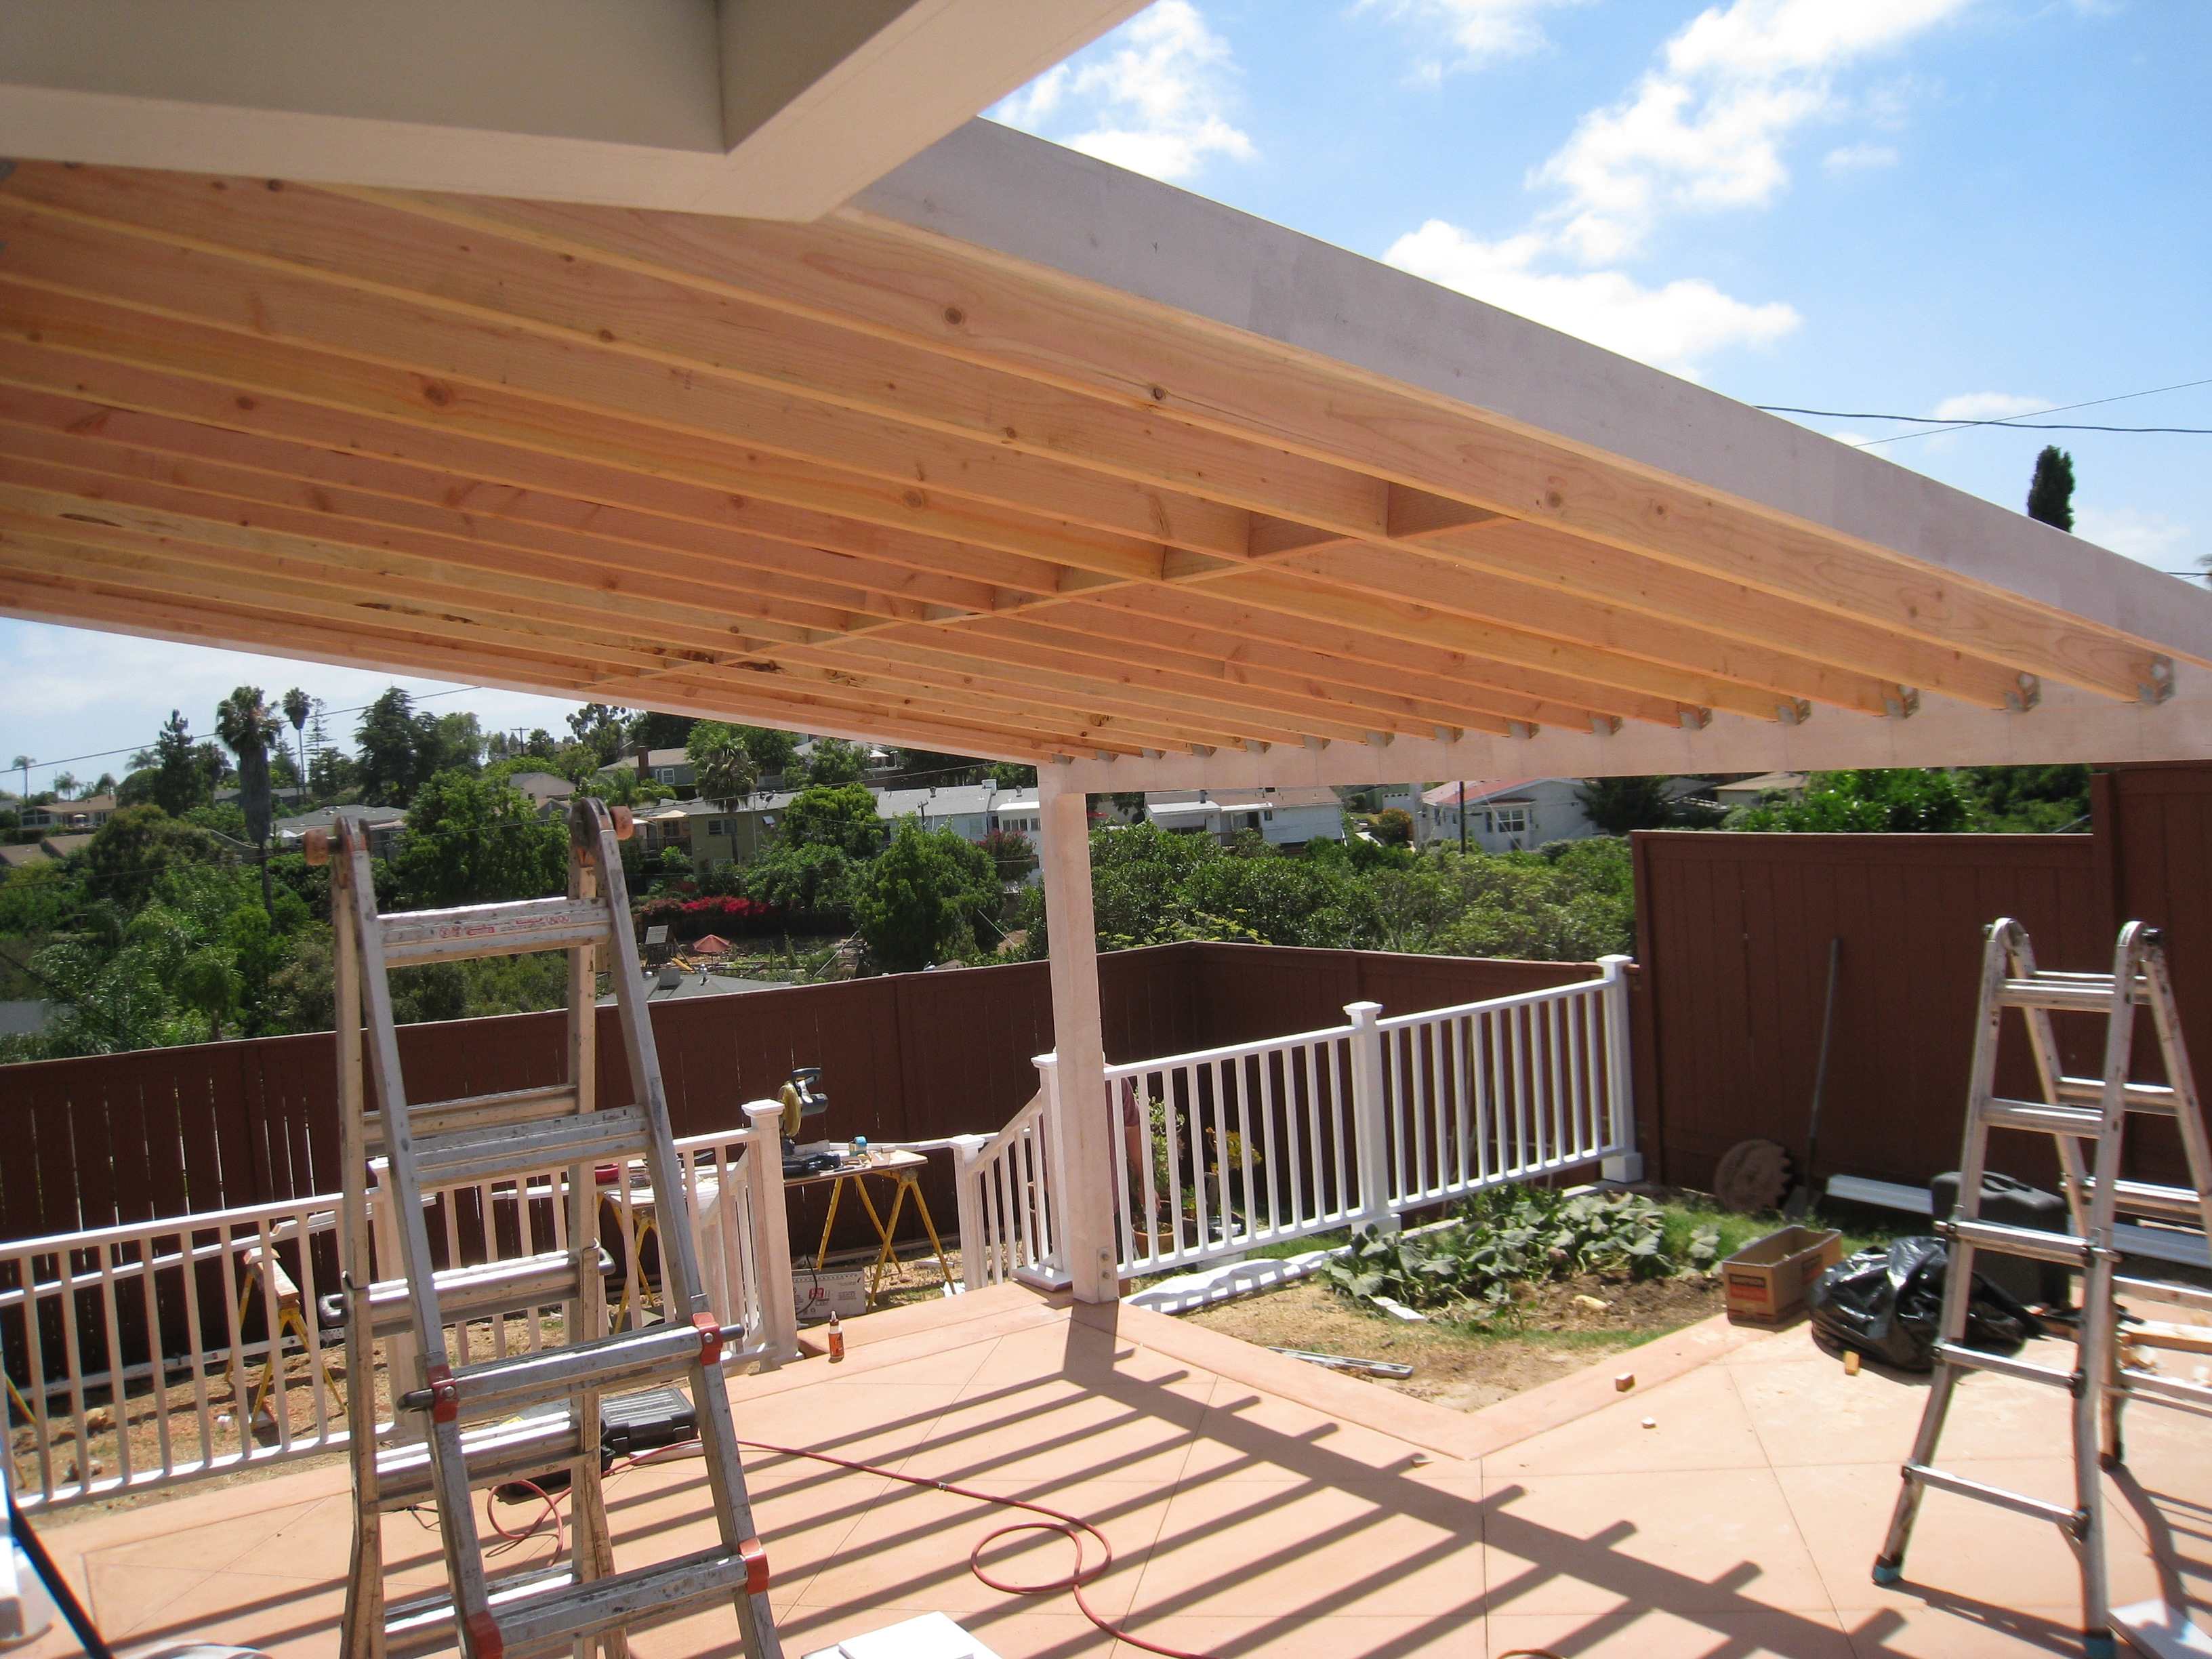 Shade Aluminum Patio Covered Wood Covers Vs Best Rate Repair inside proportions 3264 X 2448